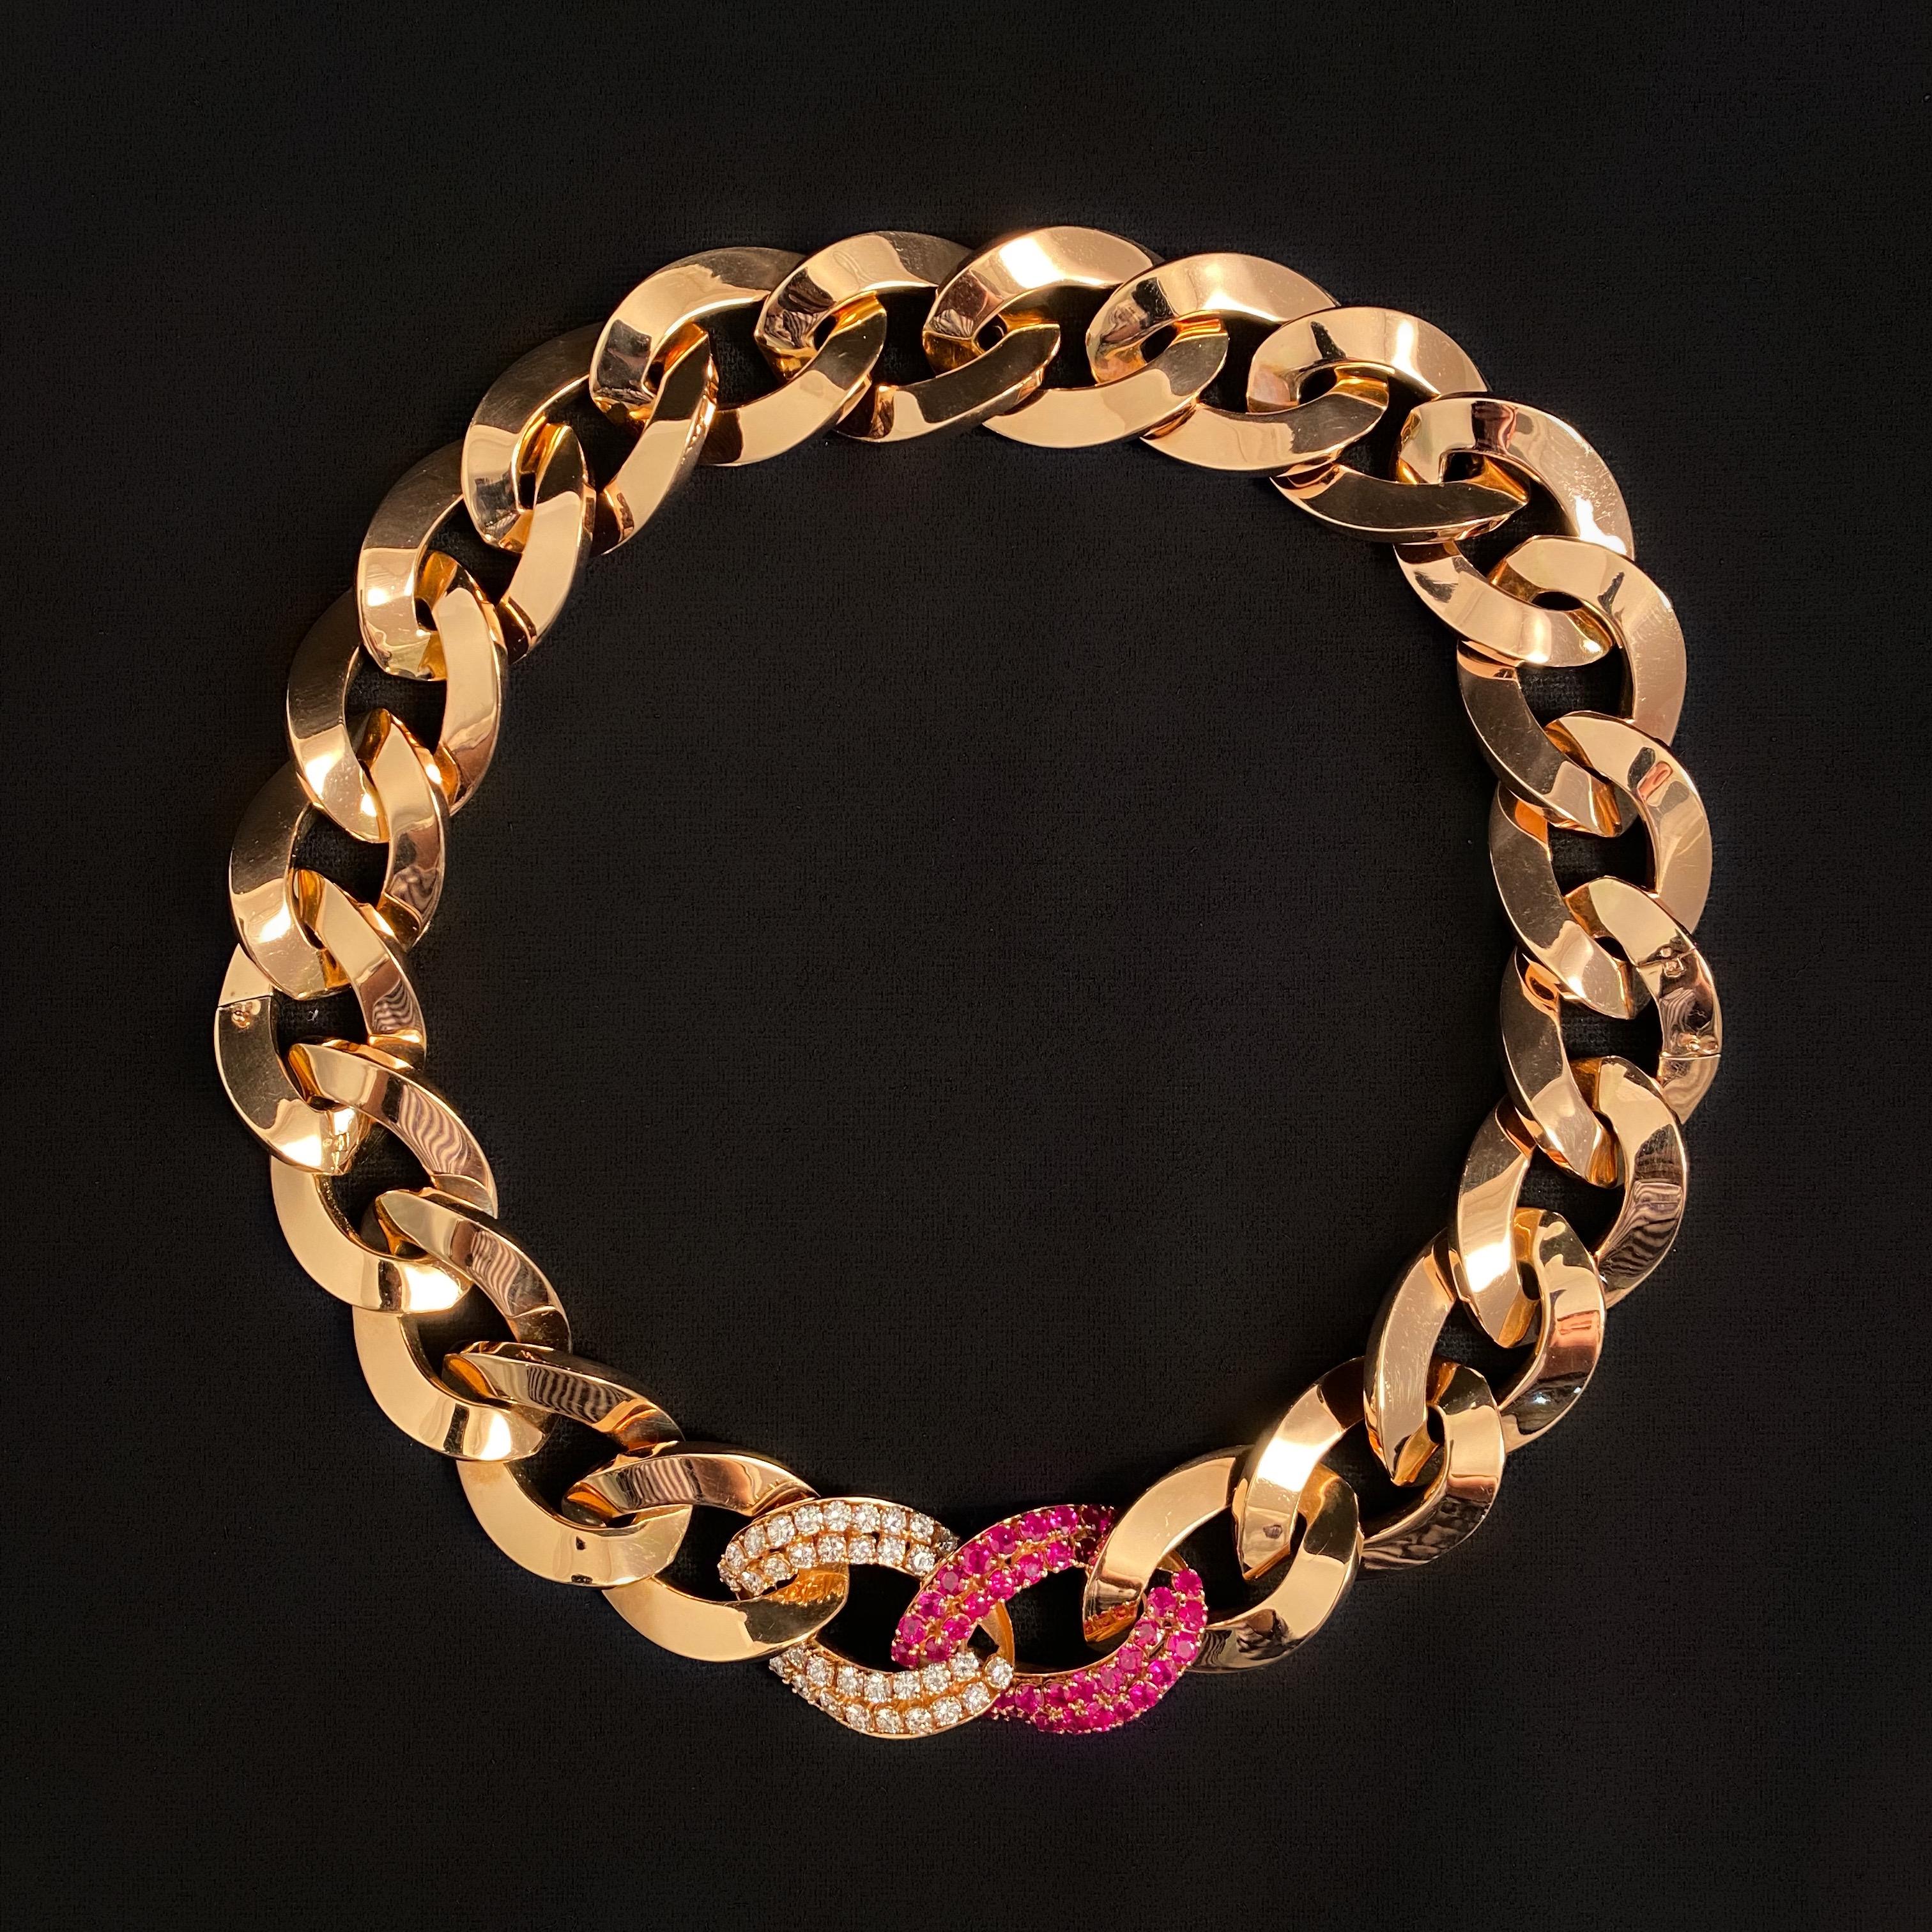 Fani Gioielli Vintage Ruby and Diamond Necklace Convertible into a Pair of Bracelets in 18 Kara Rose Gold, with Provenance, Italy, c. 2000. The necklace is designed as a wide curb link chain, one link set with 39 round-cut rubies connected to